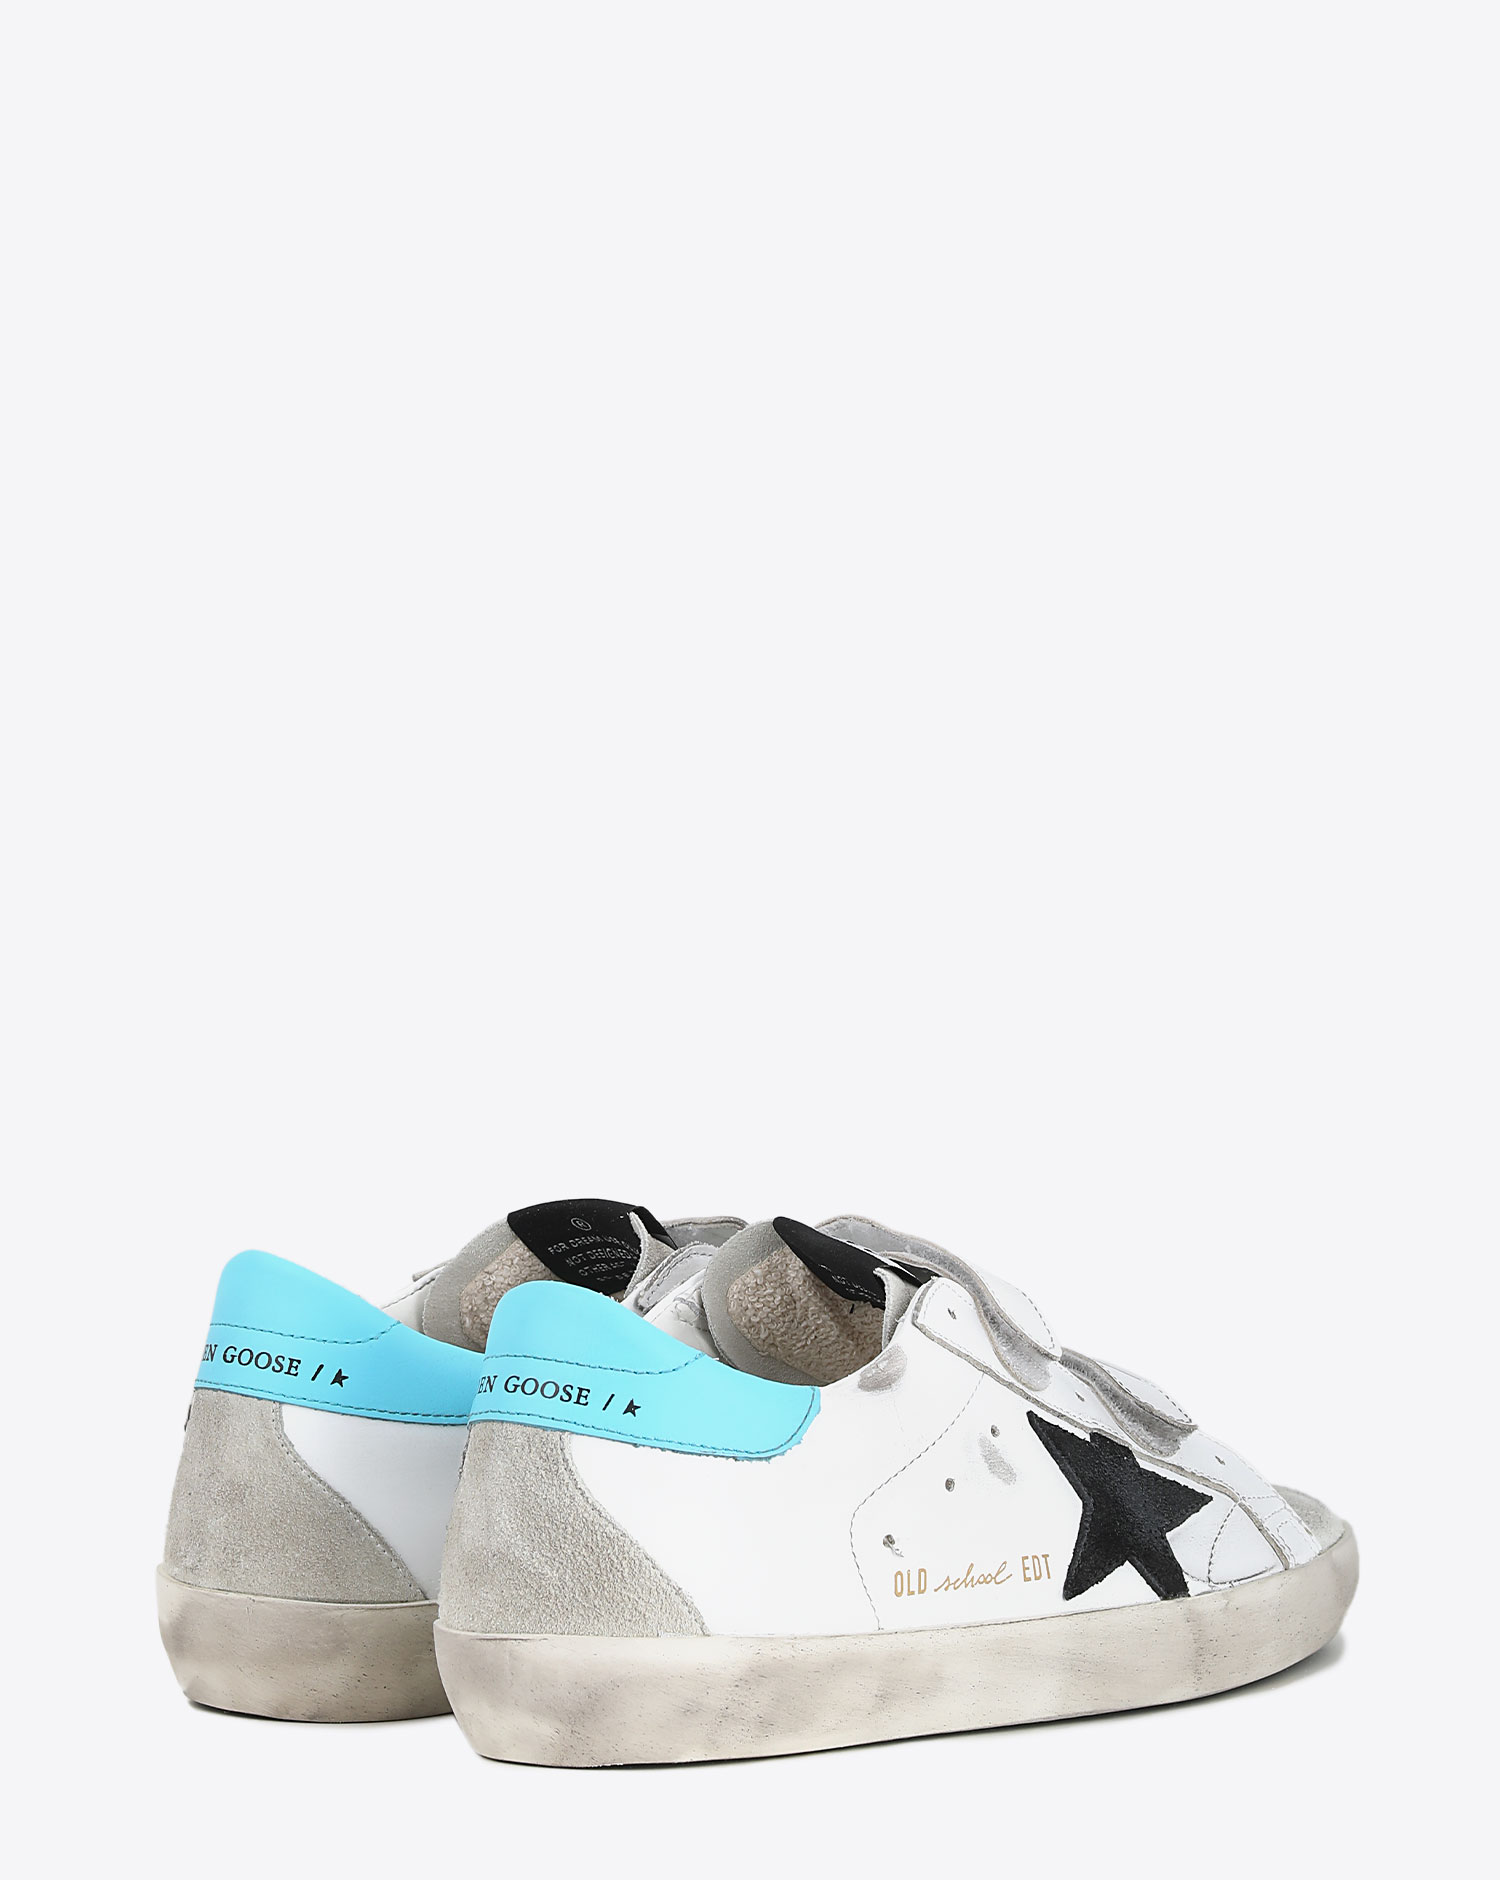 Golden Goose Woman Collection Old School - White Black Blue 10882